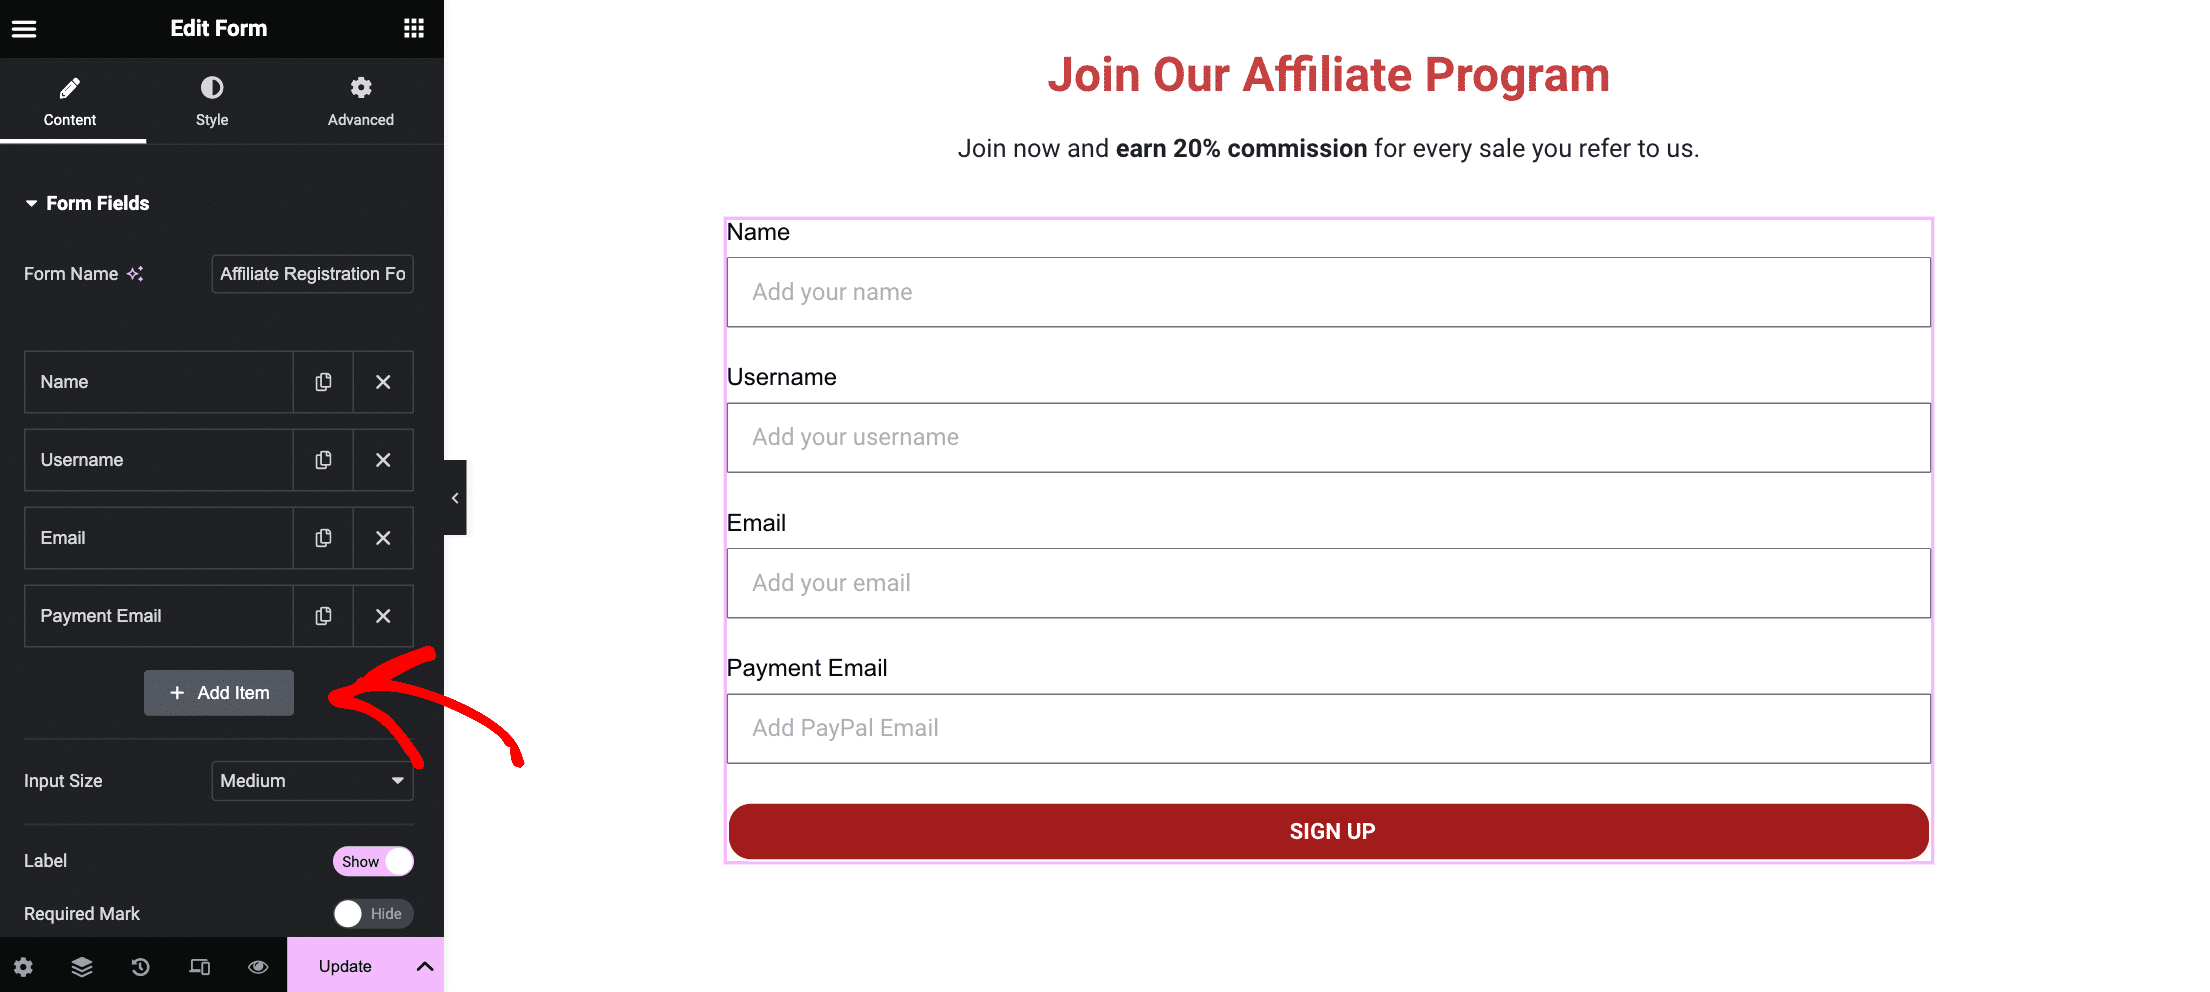 Adding fields to the affiliate registration form